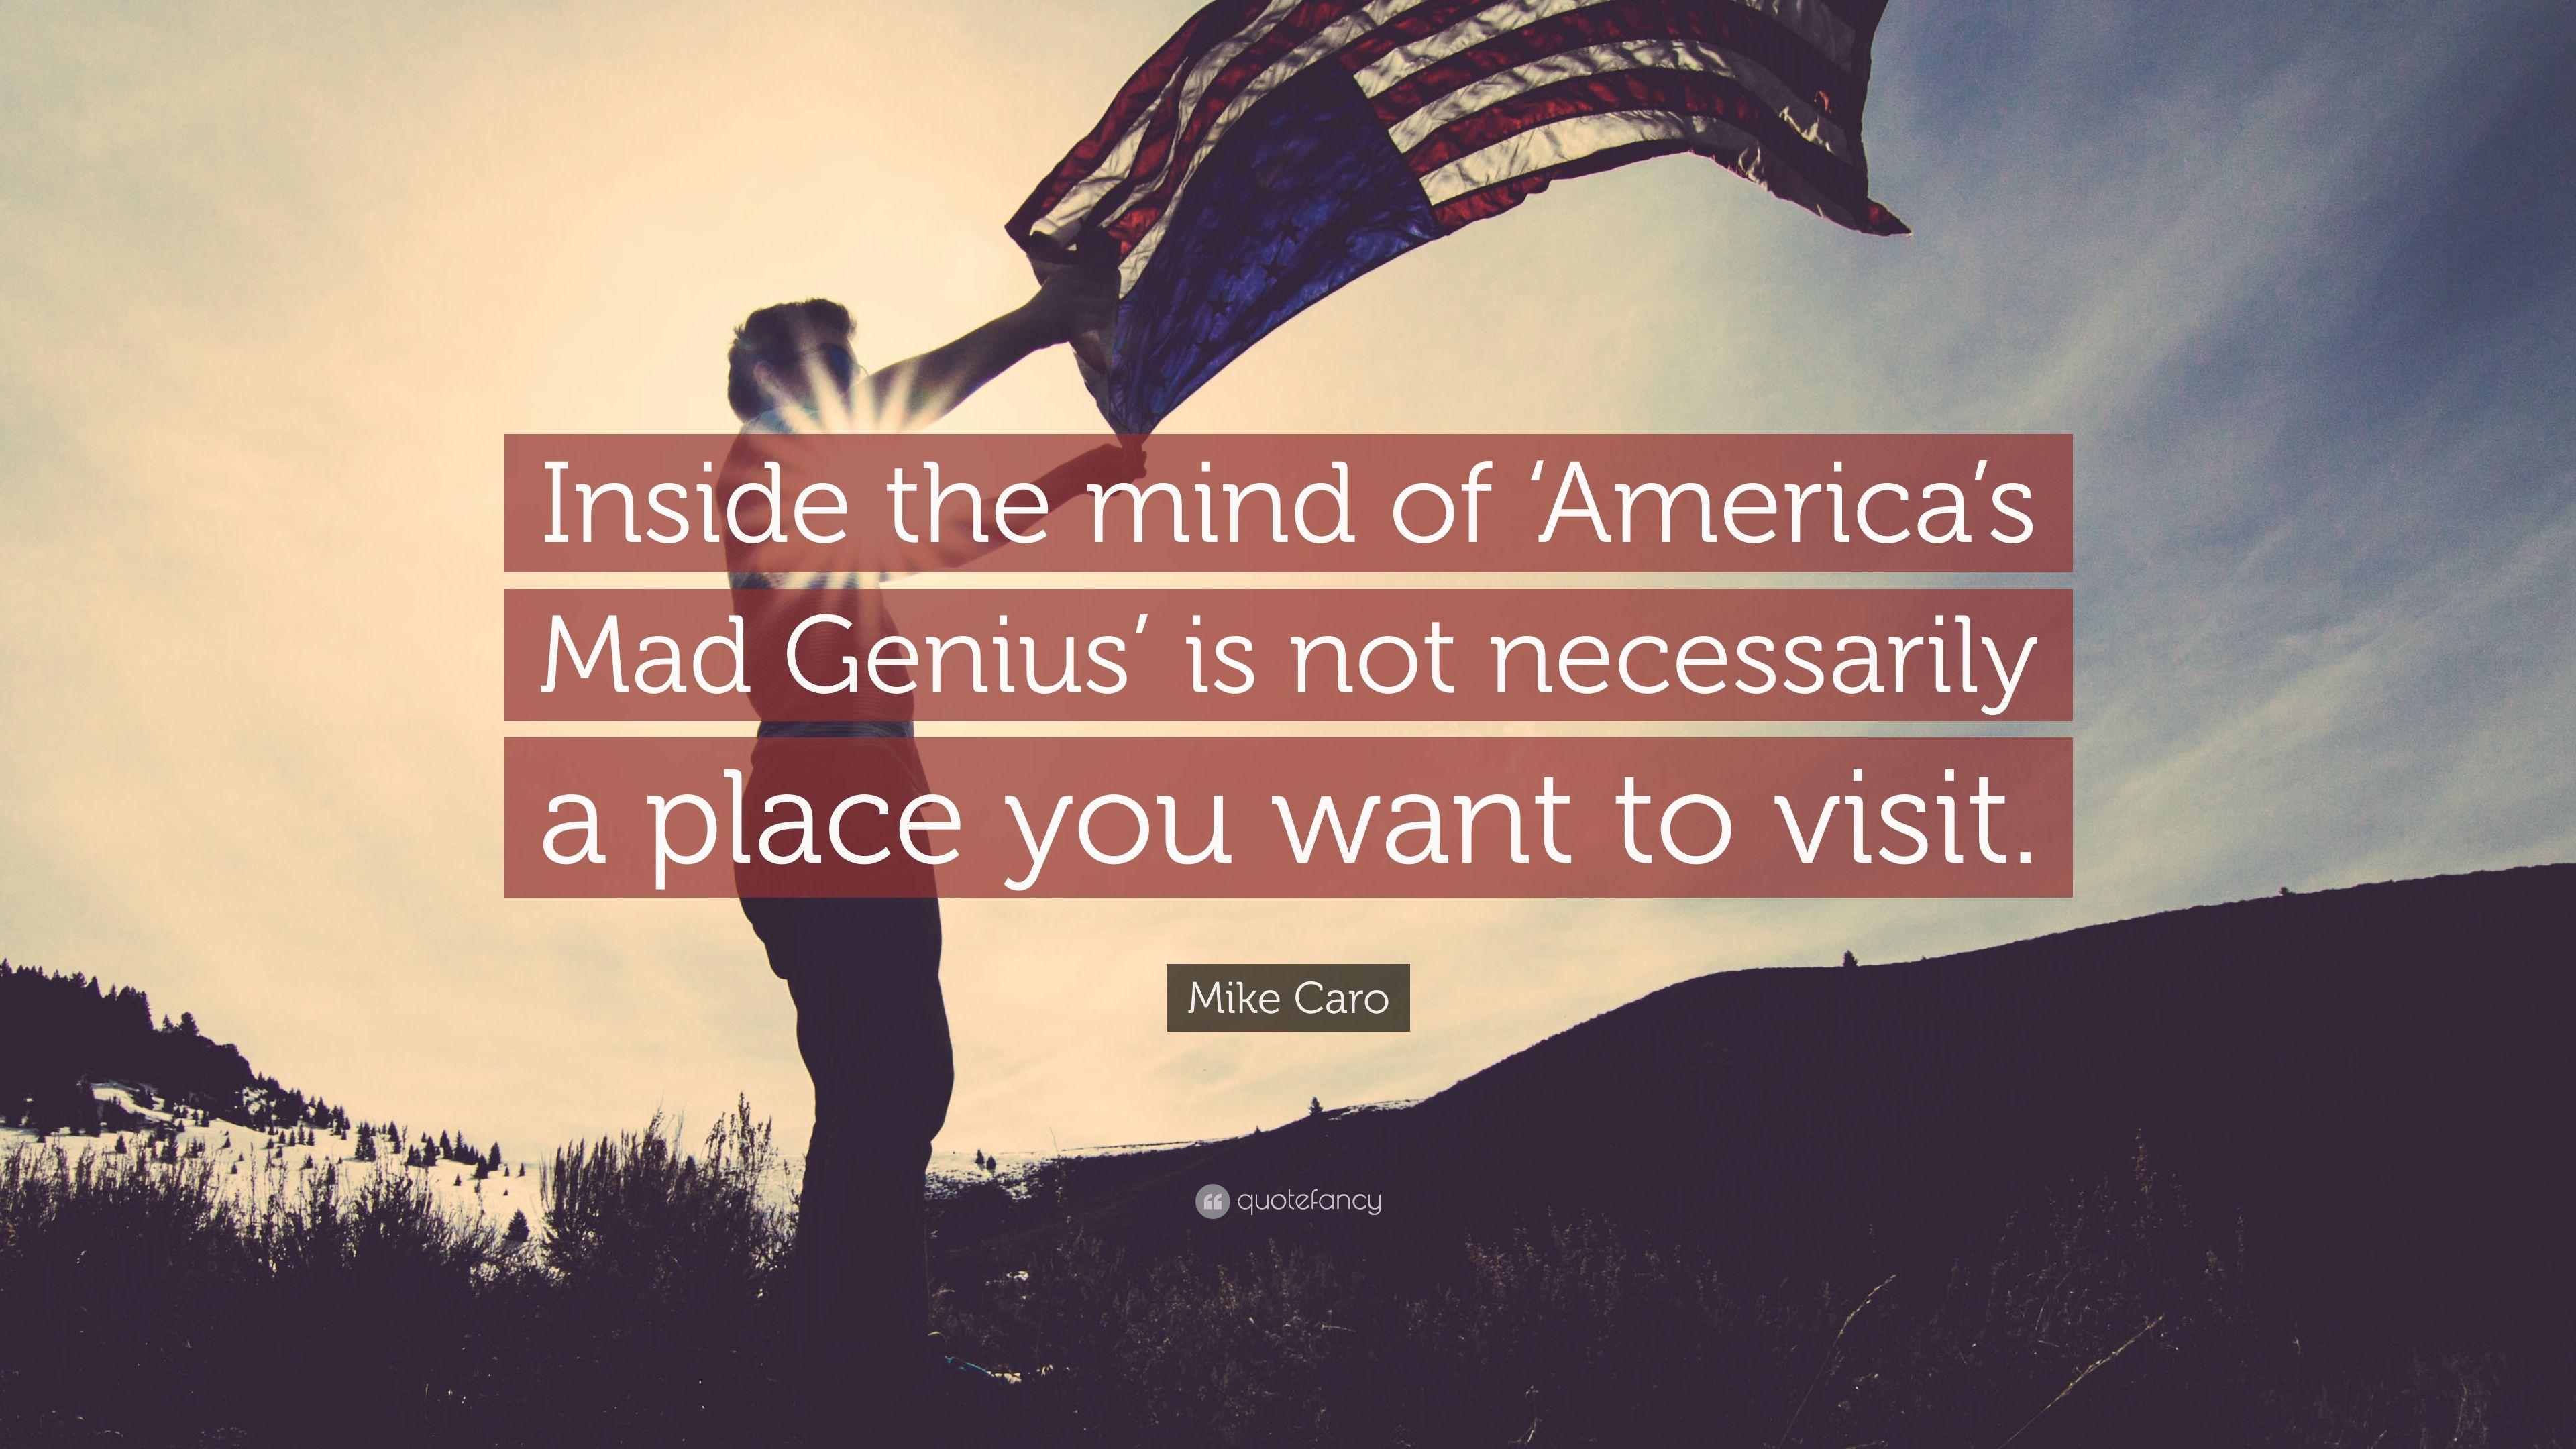 Mike Caro Quote: “Inside the mind of 'America's Mad Genius' is not